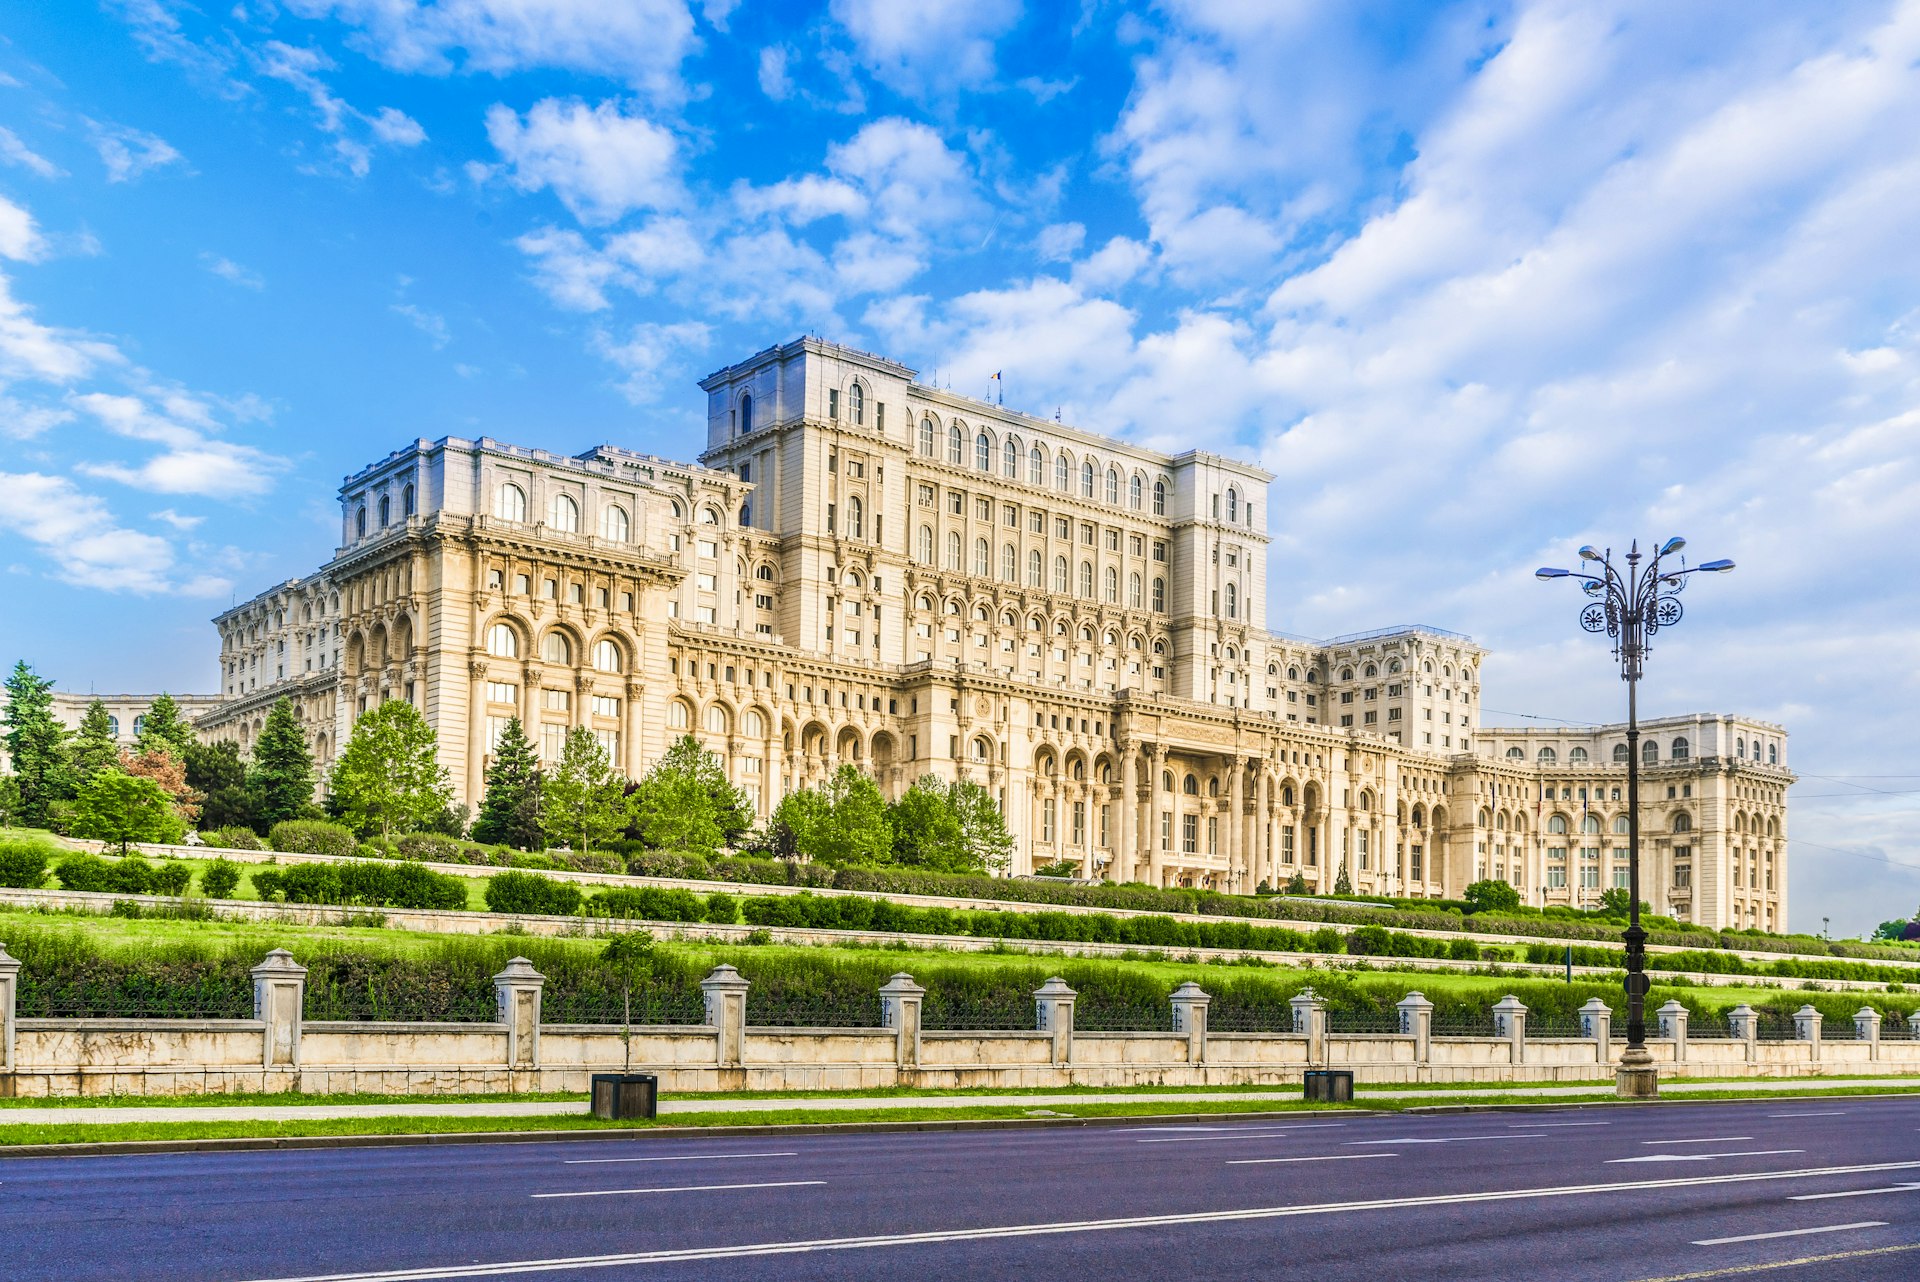 The Palace of Parliament in Bucharest